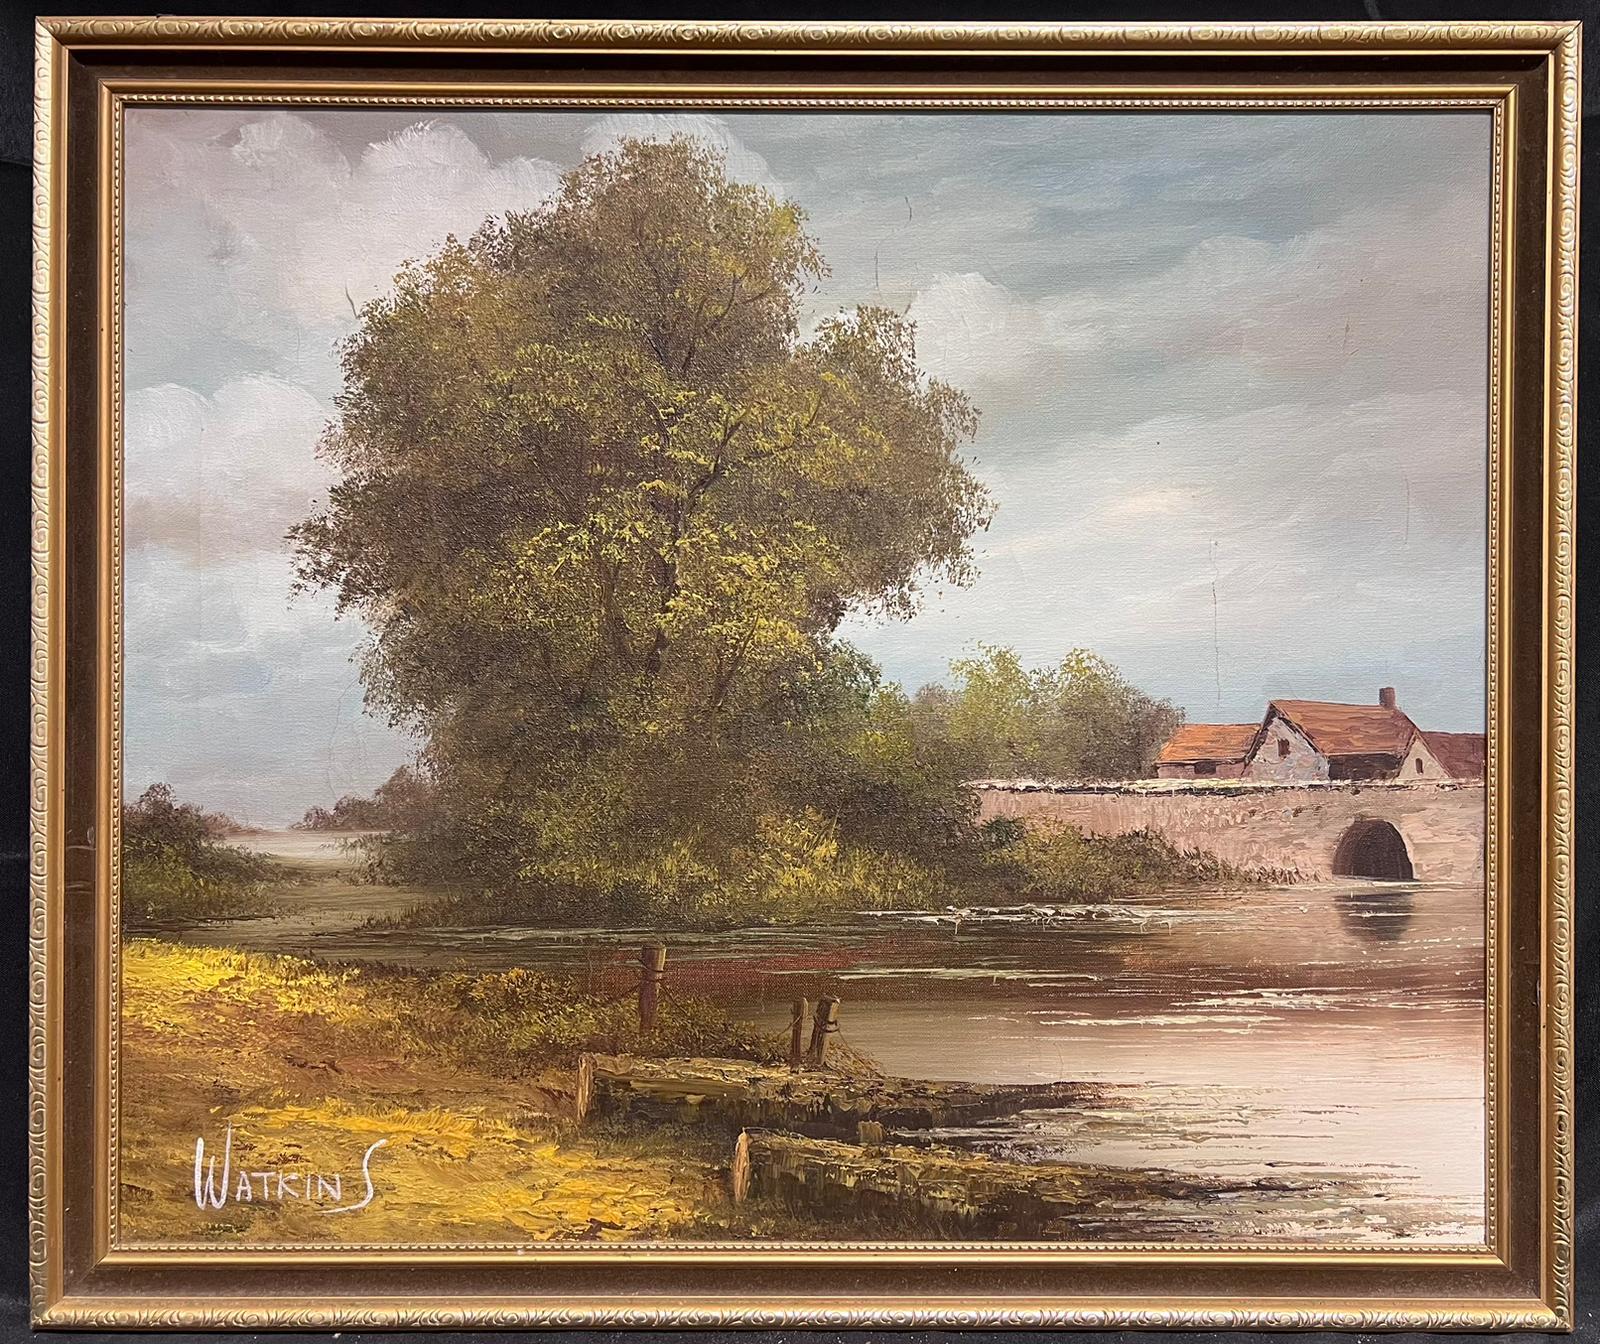 Tranquil Rural English River Landscape signed oil painting on canvas